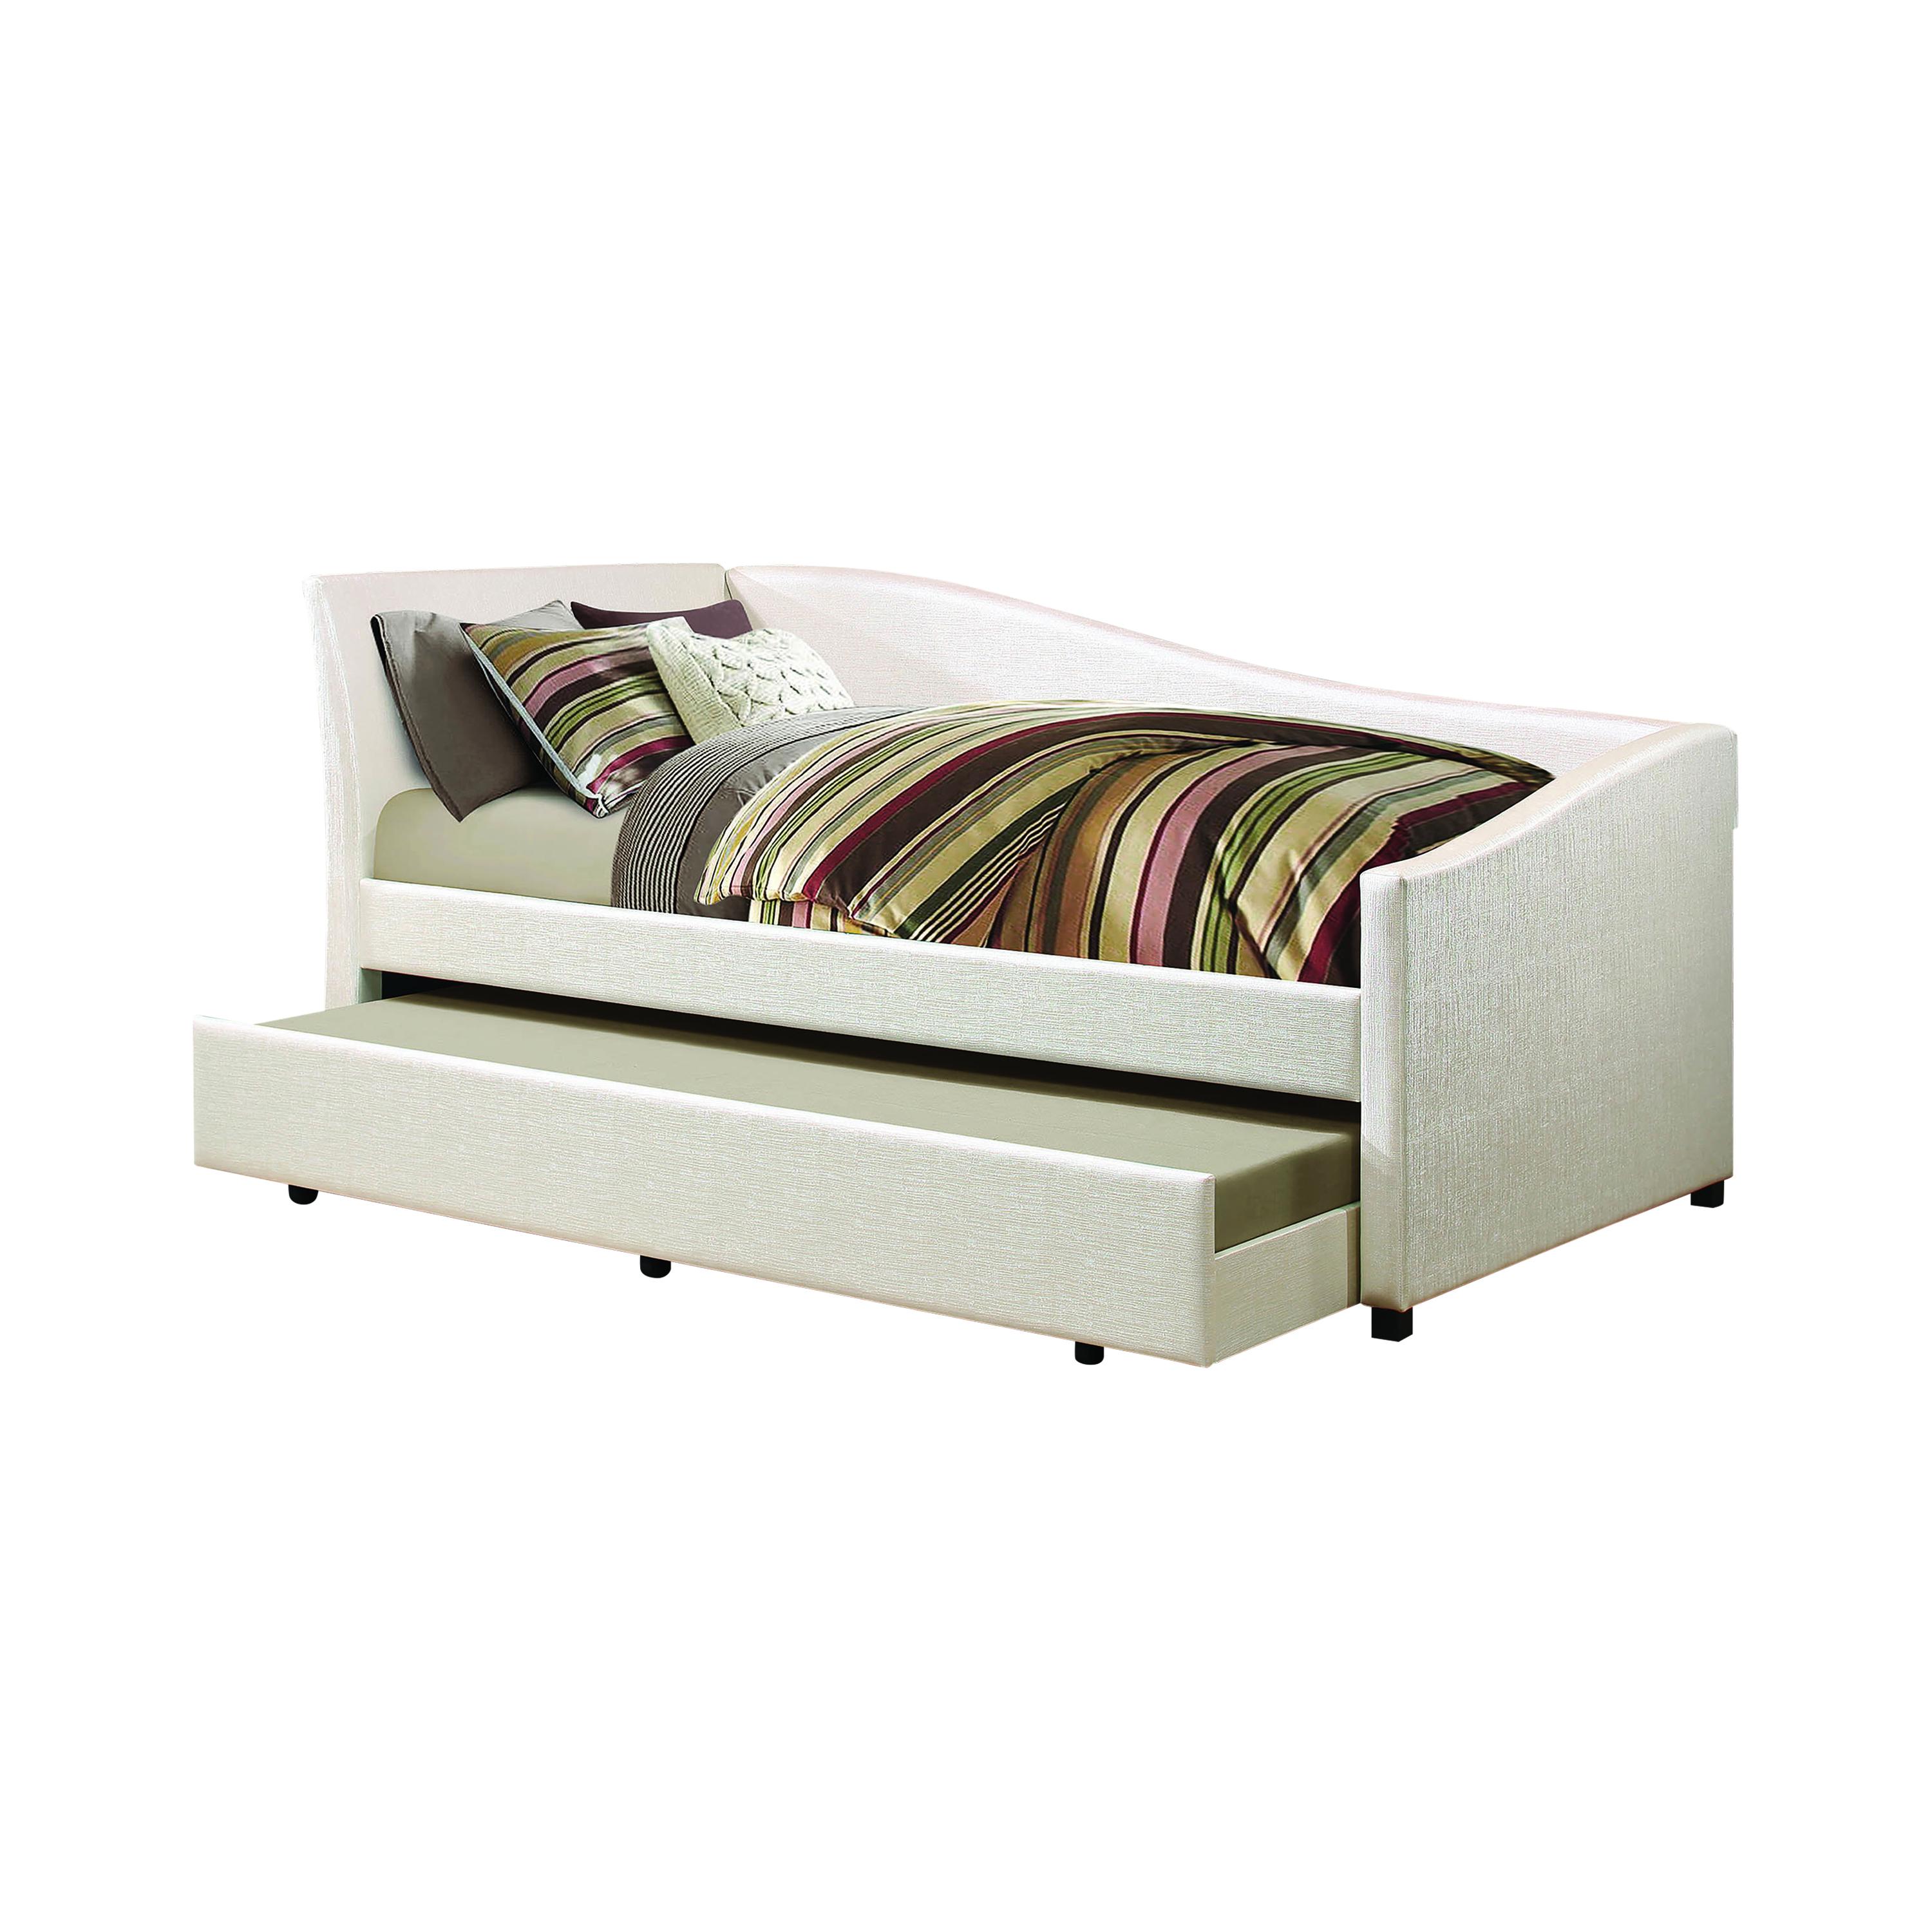 Contemporary Daybed w/Trundle 300509 300509 in Ivory Leatherette